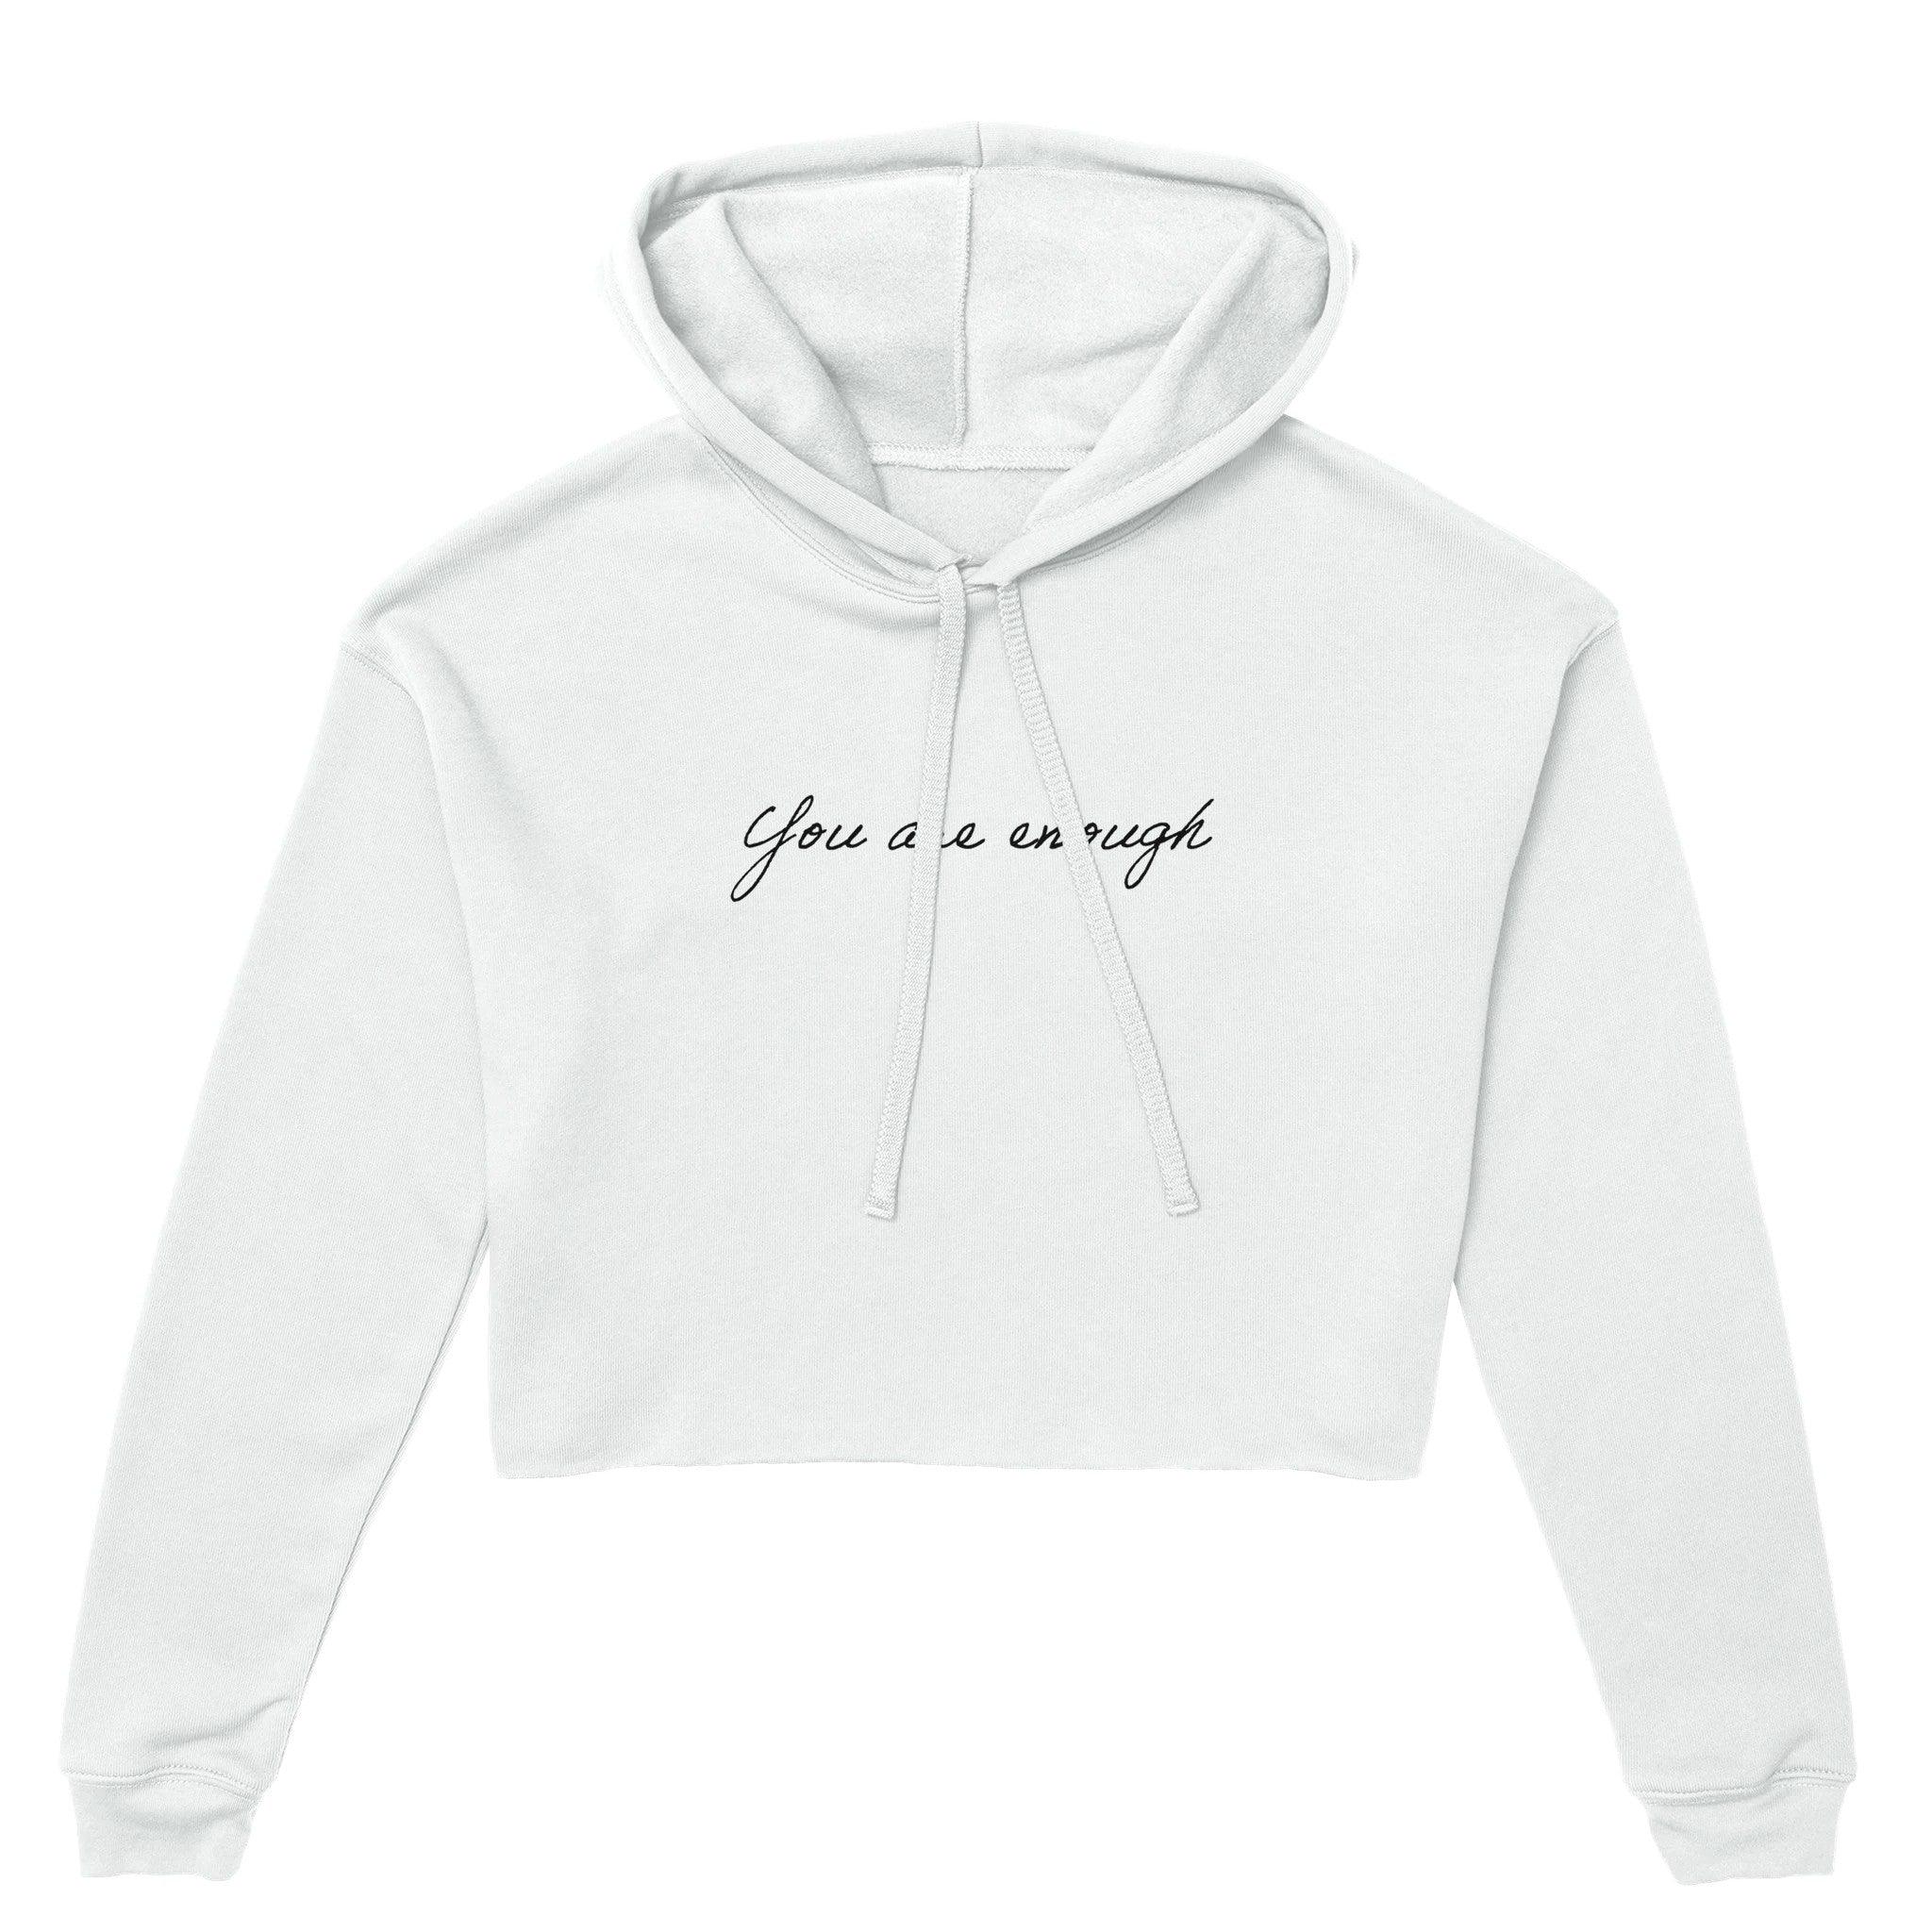 'You are enough' Cropped Hoodie - POMA